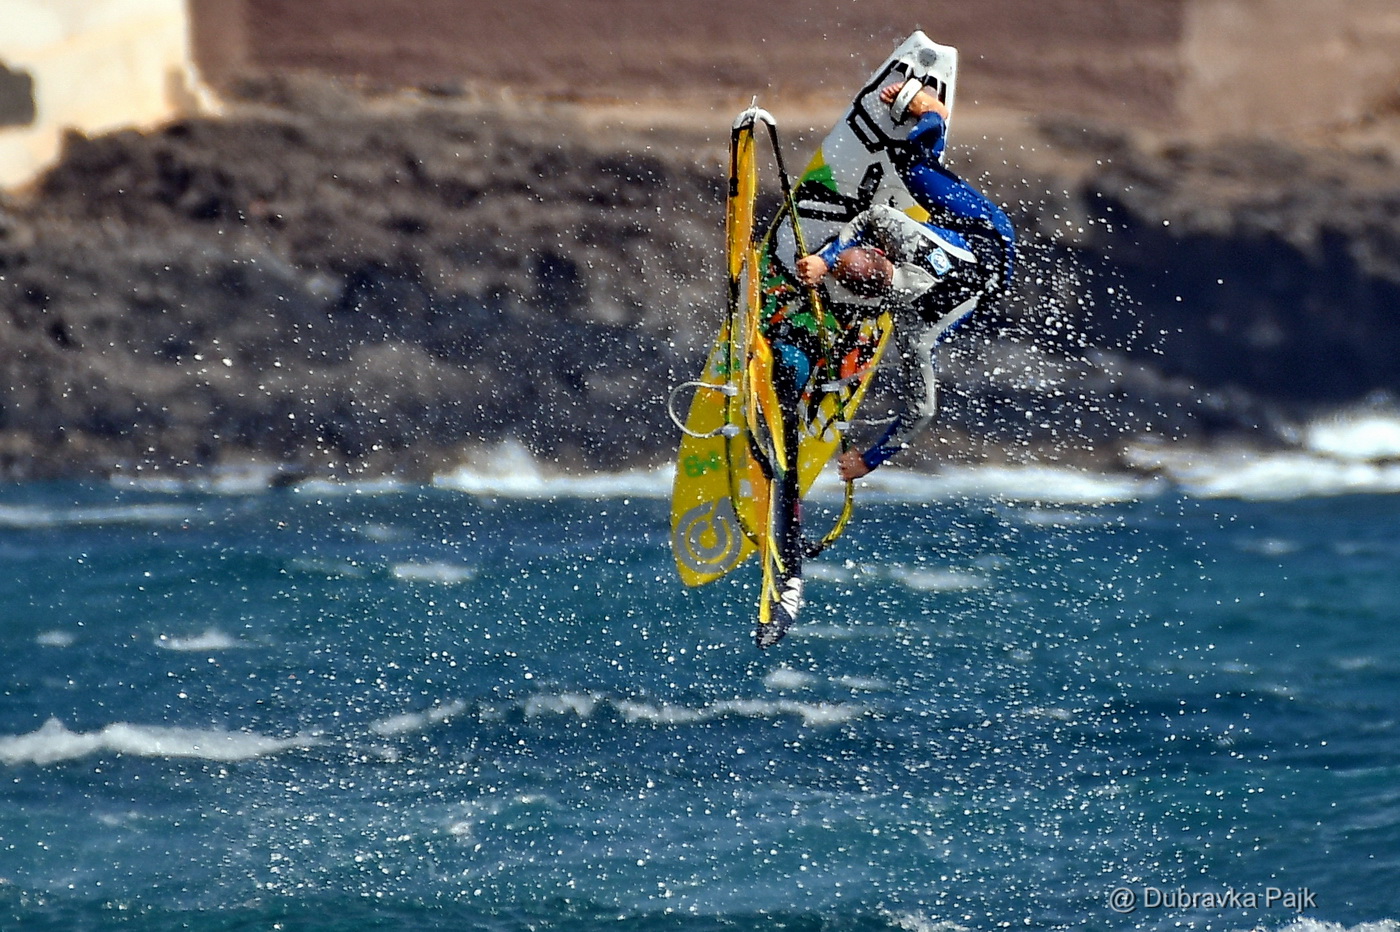 To me windsurfing is more than anything